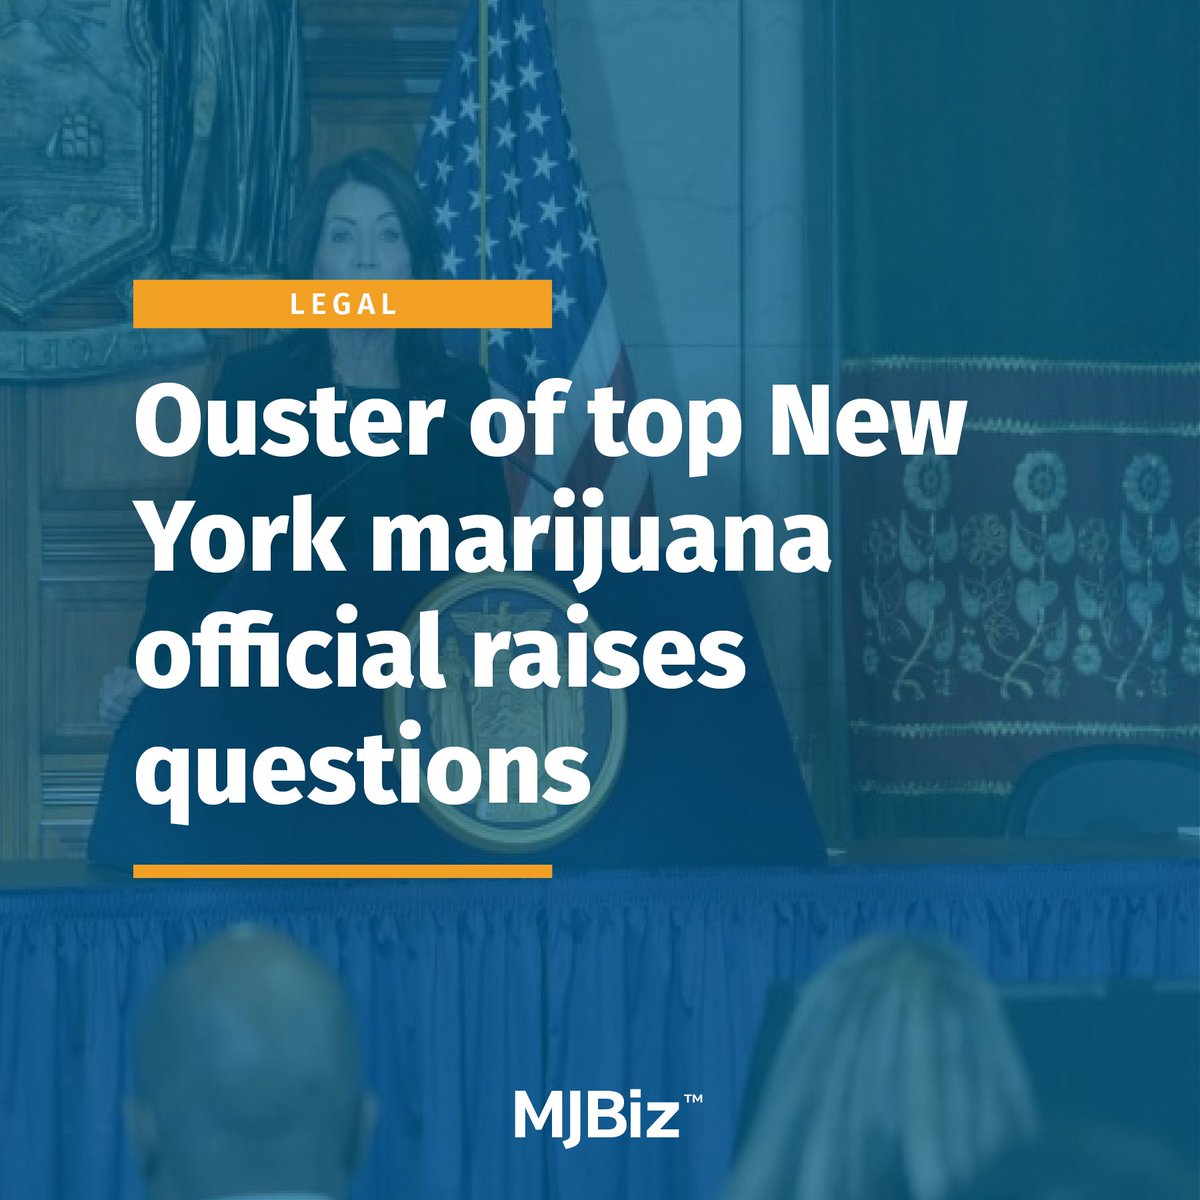 Though rumors of Alexander’s exit had been brewing for months, there are rumblings in state political and cannabis circles that Hochul was fishing for a scapegoat – and it will be some time before #NewYork’s adult-use market fulfills its significant potential and ambitious social